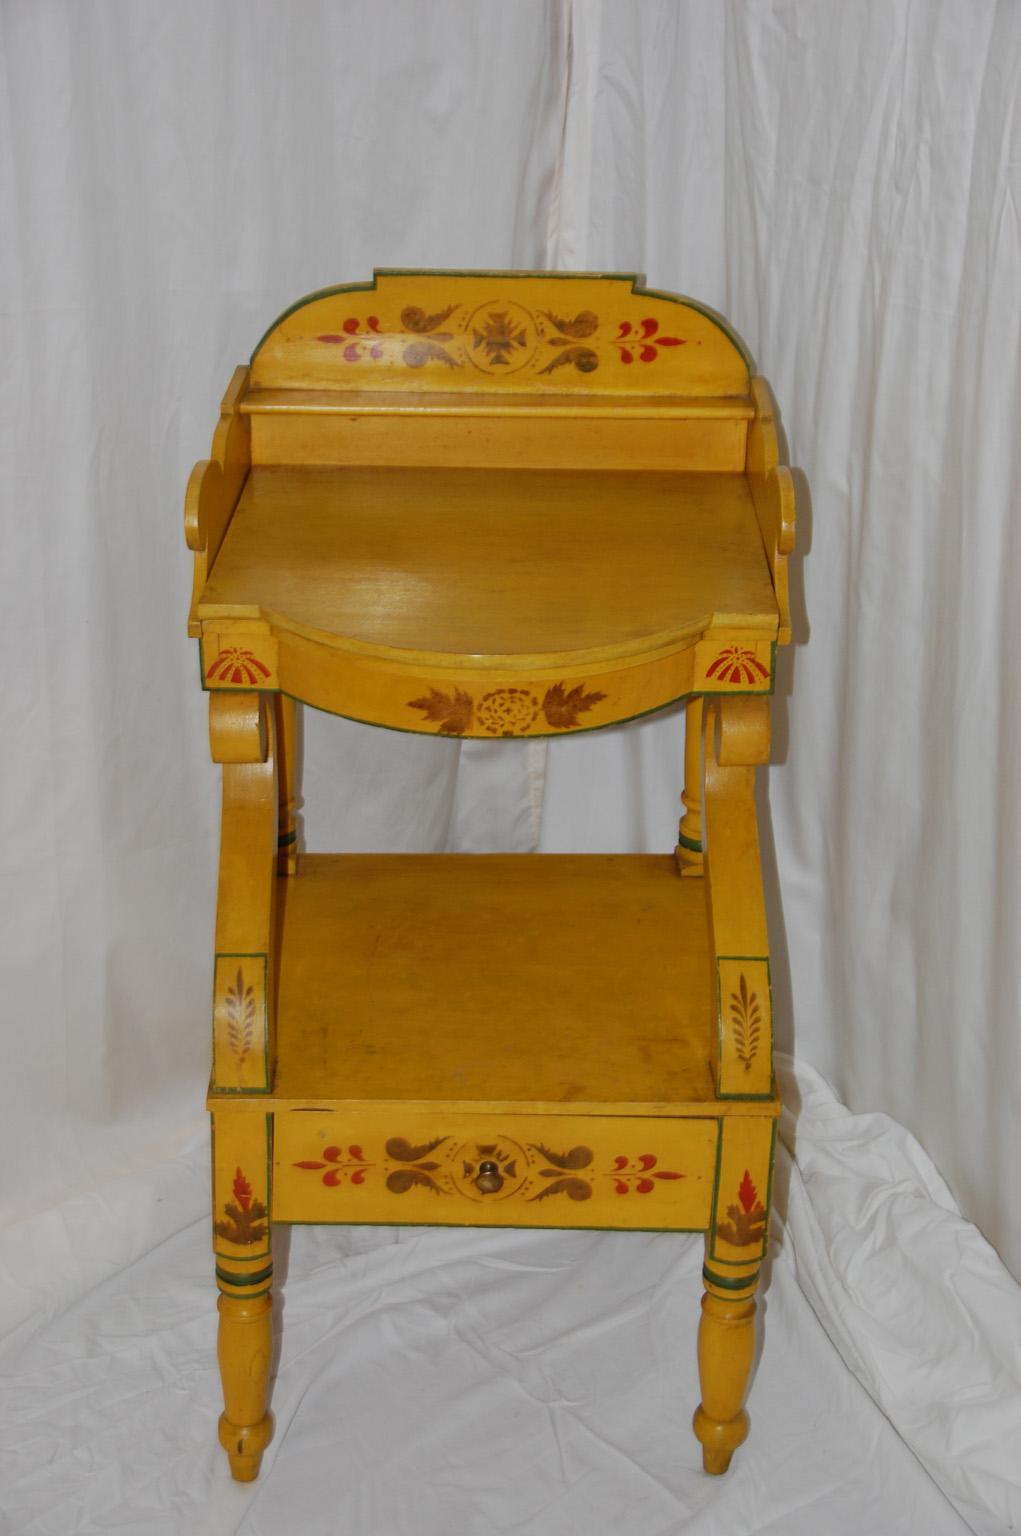 American New England painted and decorated bowfront pine washstand with removable painted cover. The cover conceals holes which held a washbowl and glasses or cups. Below the washbowl level is a shelf and drawer with neoclassical curving side